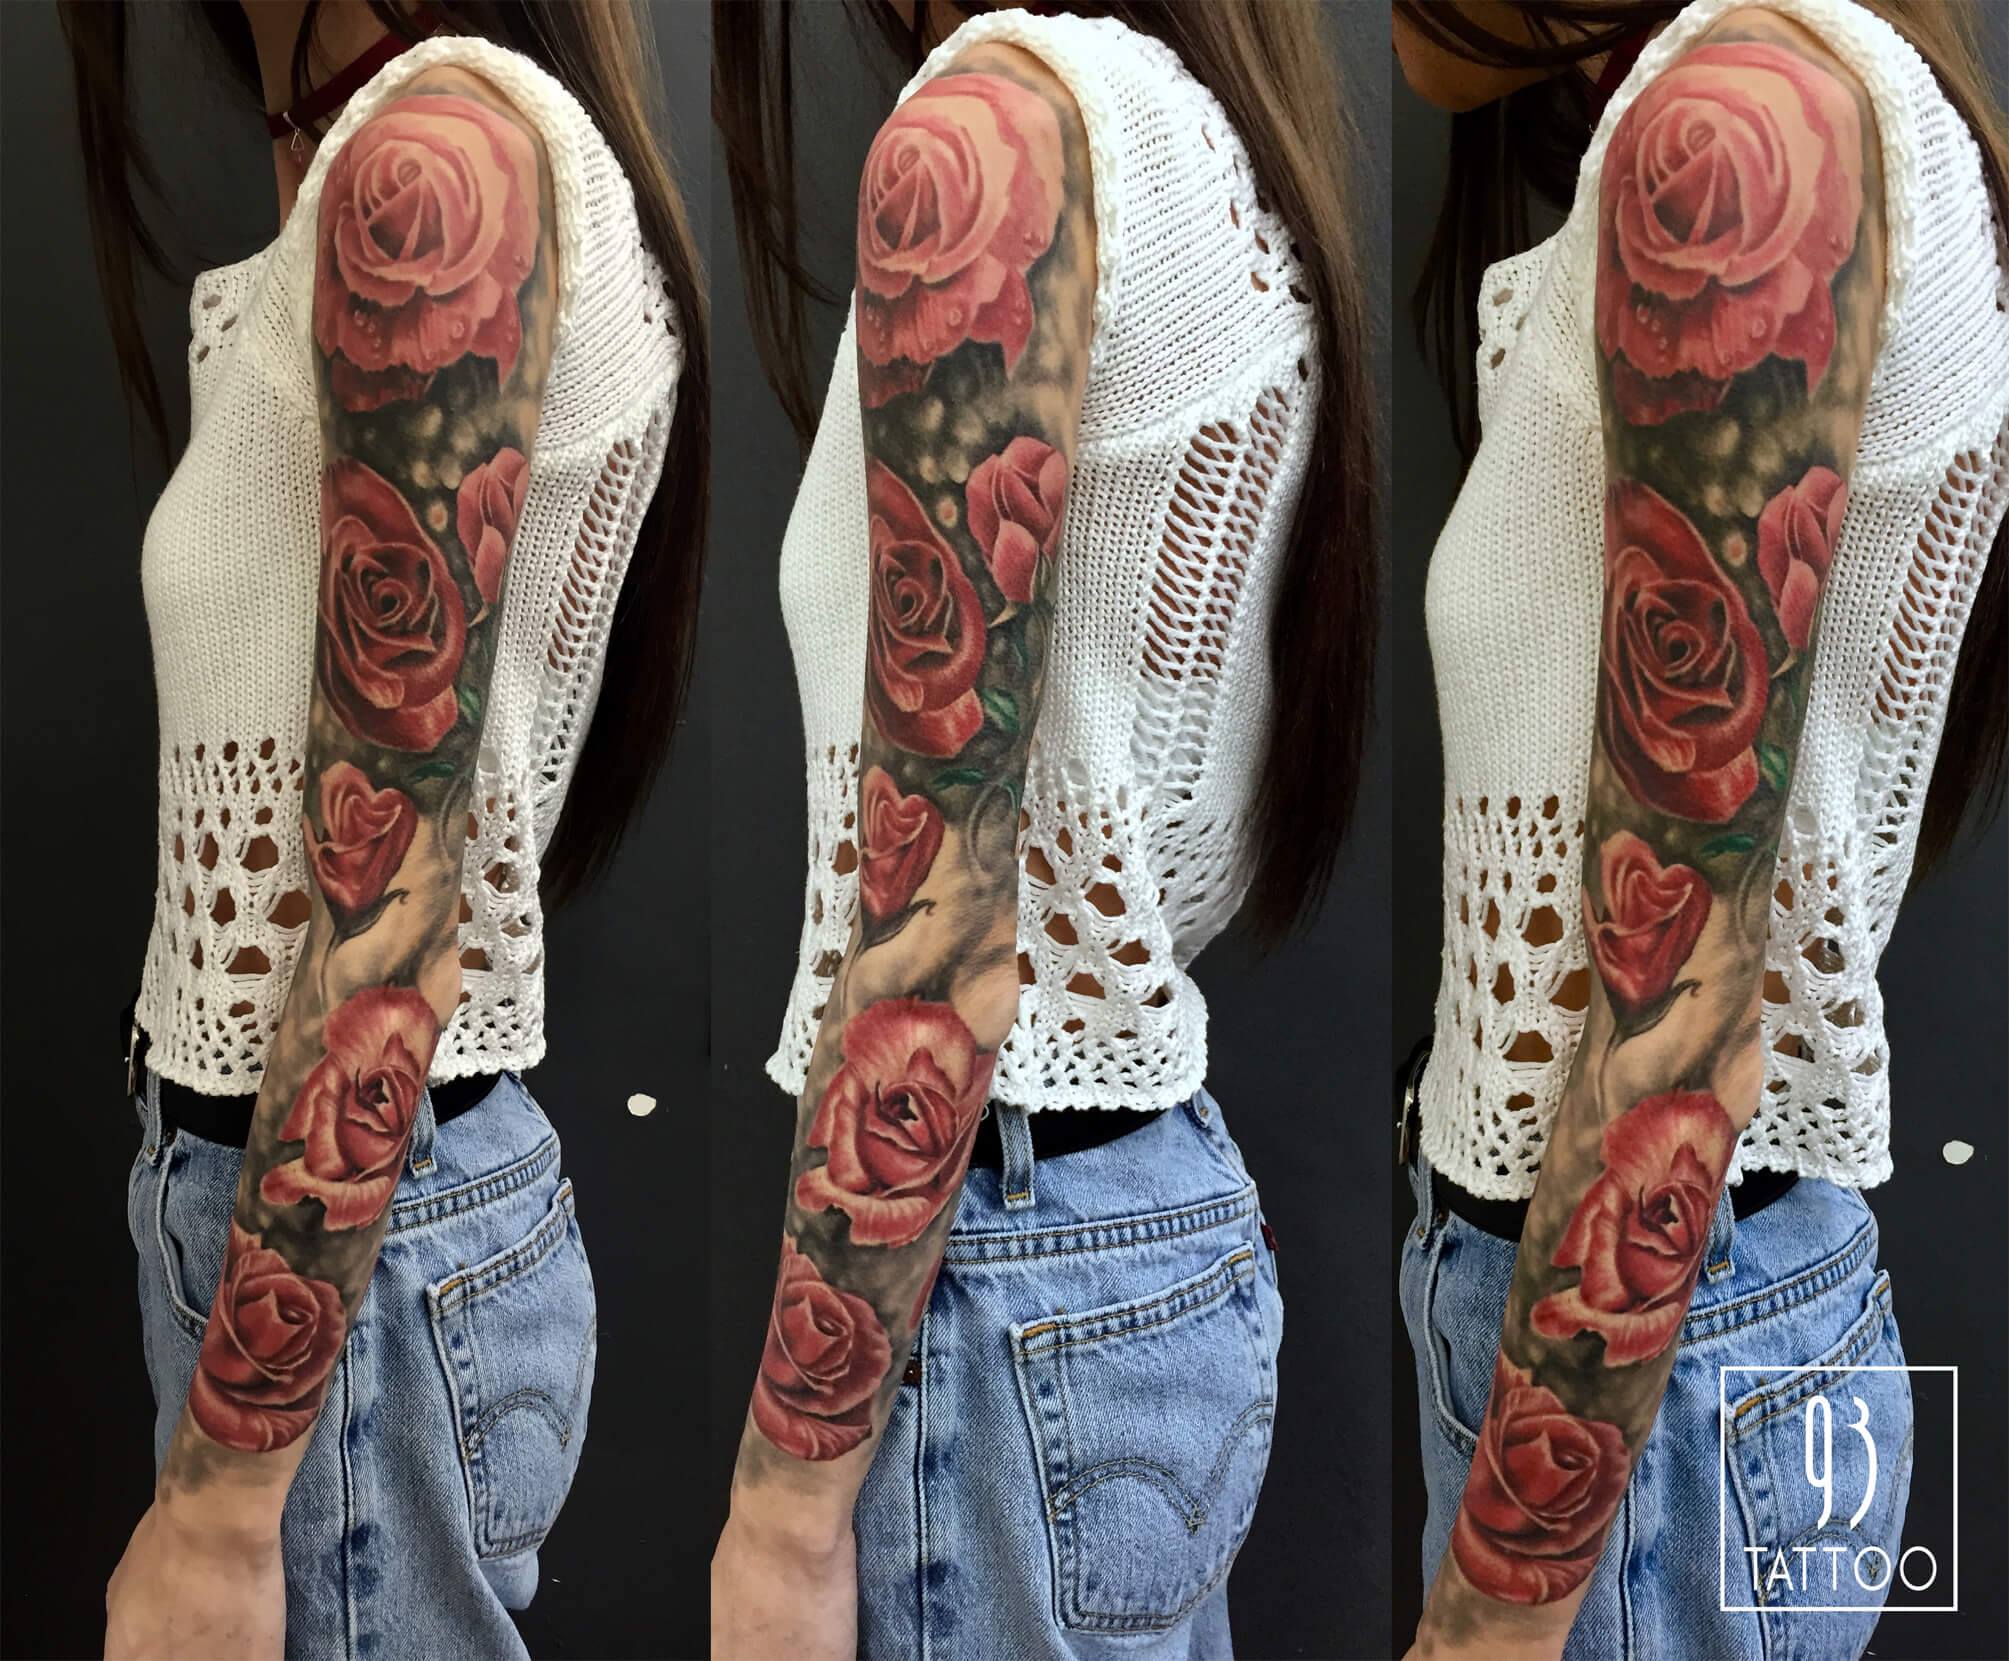 Full sleeve roses done by George